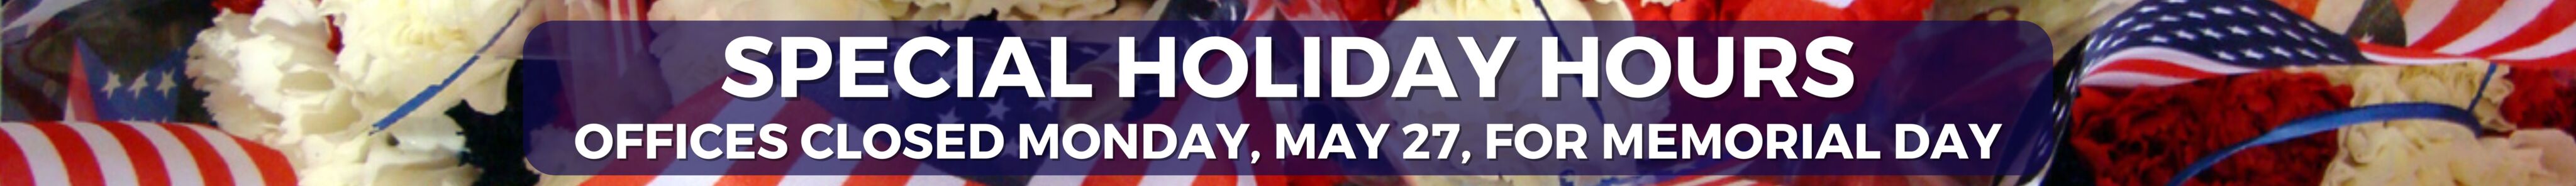 Special Holiday Hours - Offices closed Monday, May 27, for Memorial Day